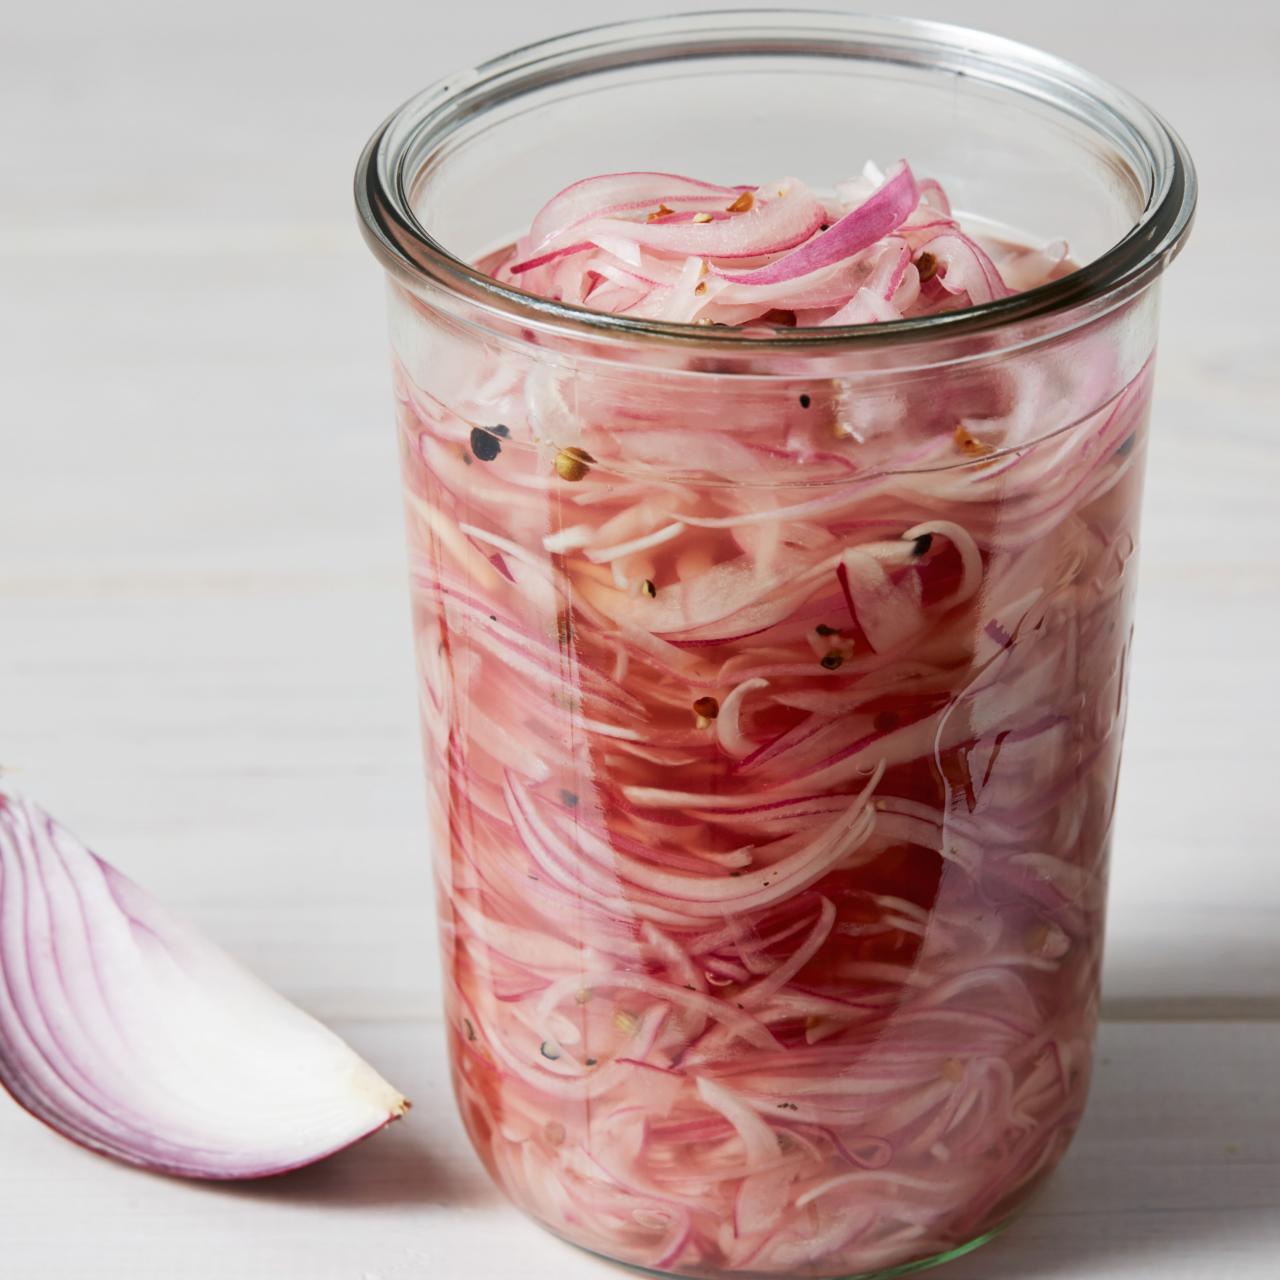 https://food.fnr.sndimg.com/content/dam/images/food/fullset/2018/3/30/1/LS-Library_Pickled-Red-Onions_s4x3.jpg.rend.hgtvcom.1280.1280.suffix/1522444123827.jpeg